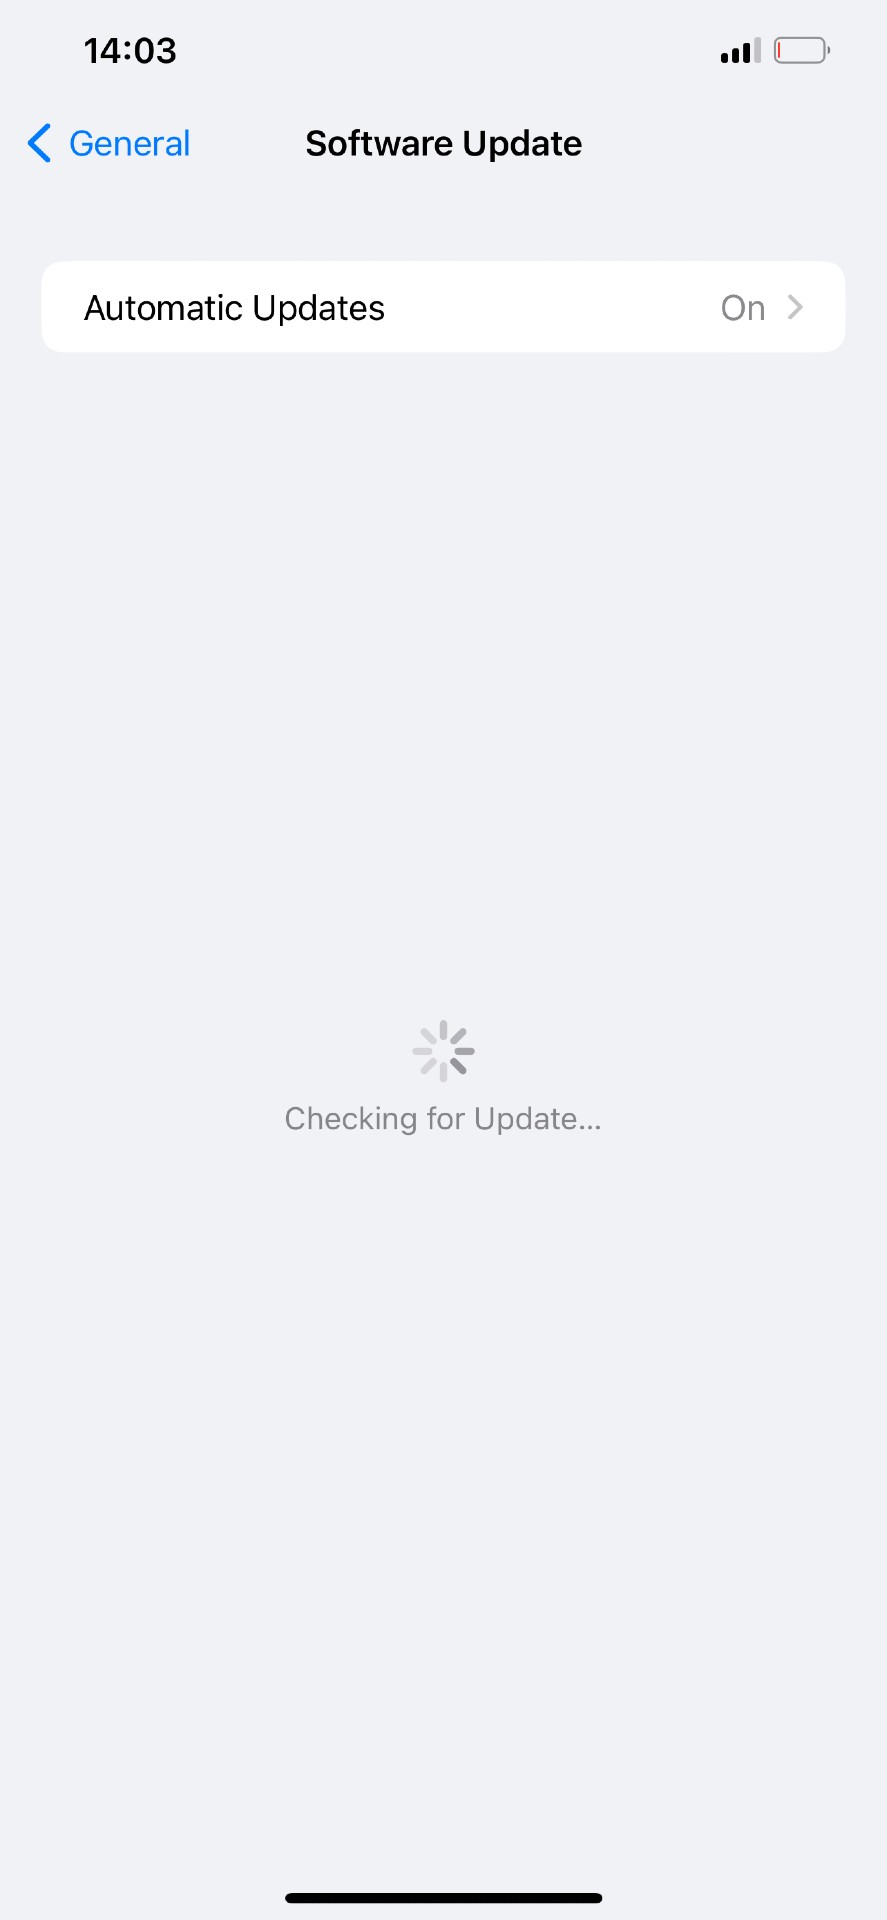 The iOS Software Update page